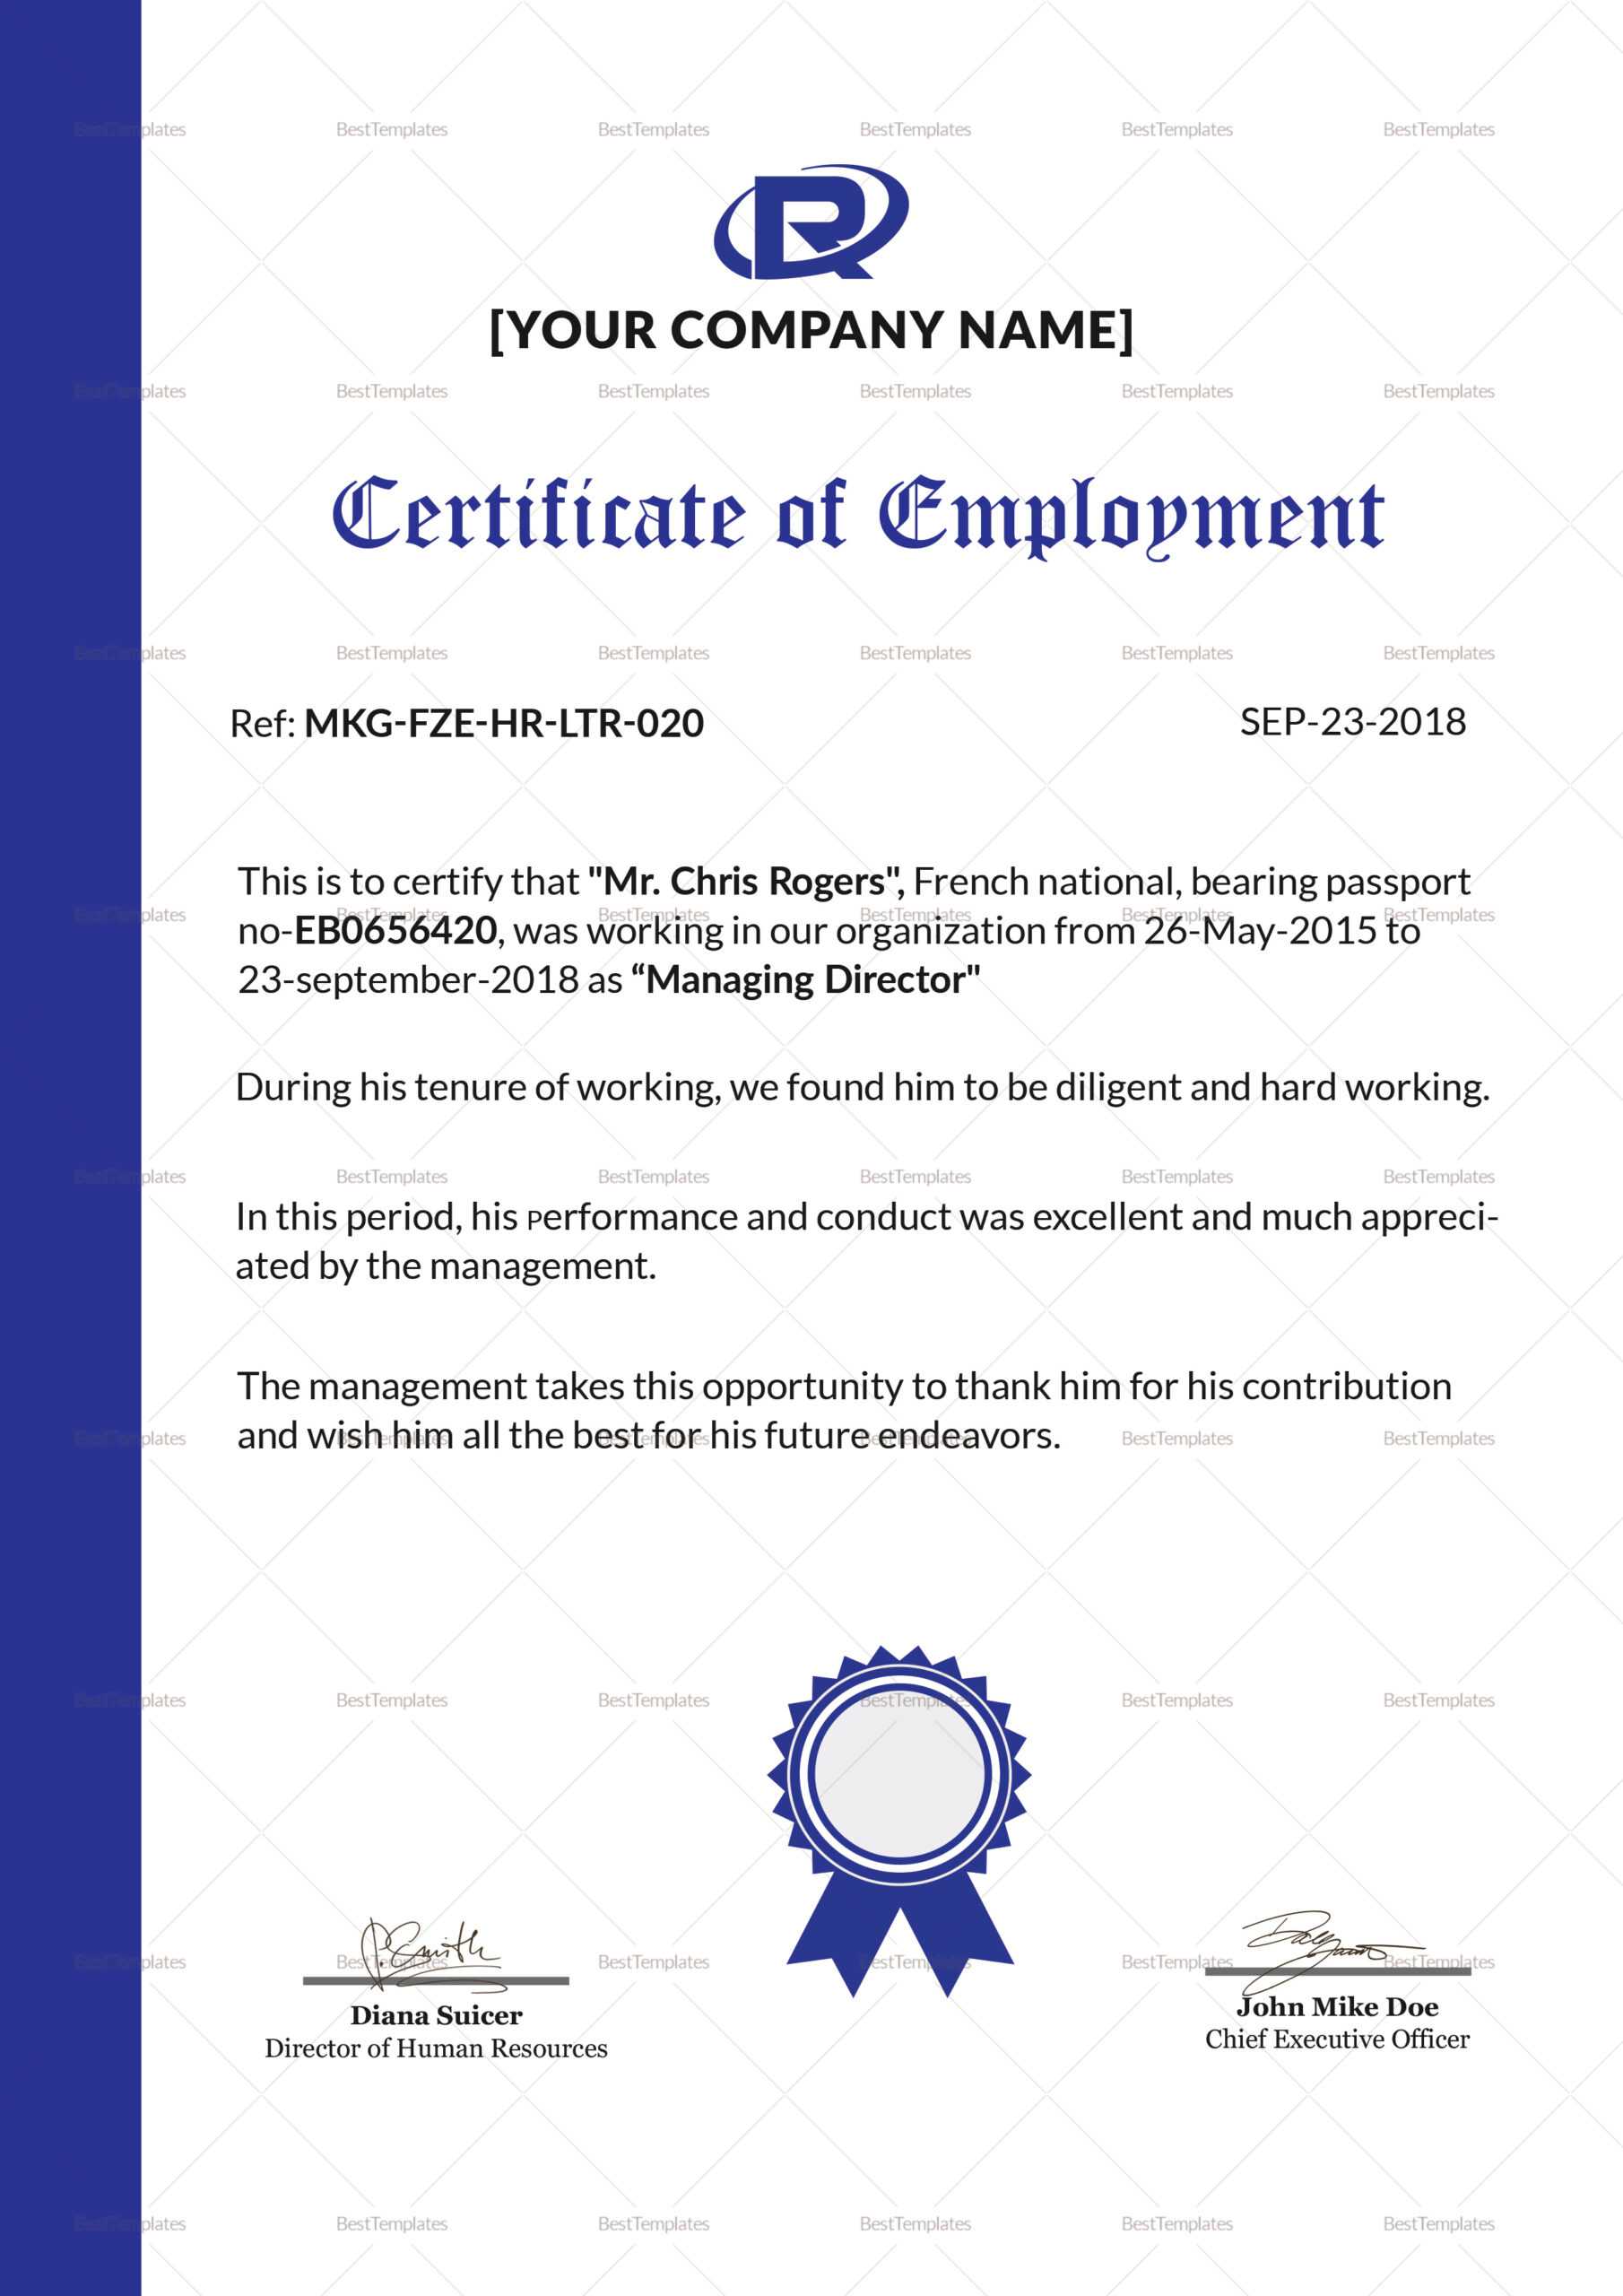 006 Certificate Of Employment Template Sample Impressive With Certificate Of Employment Template